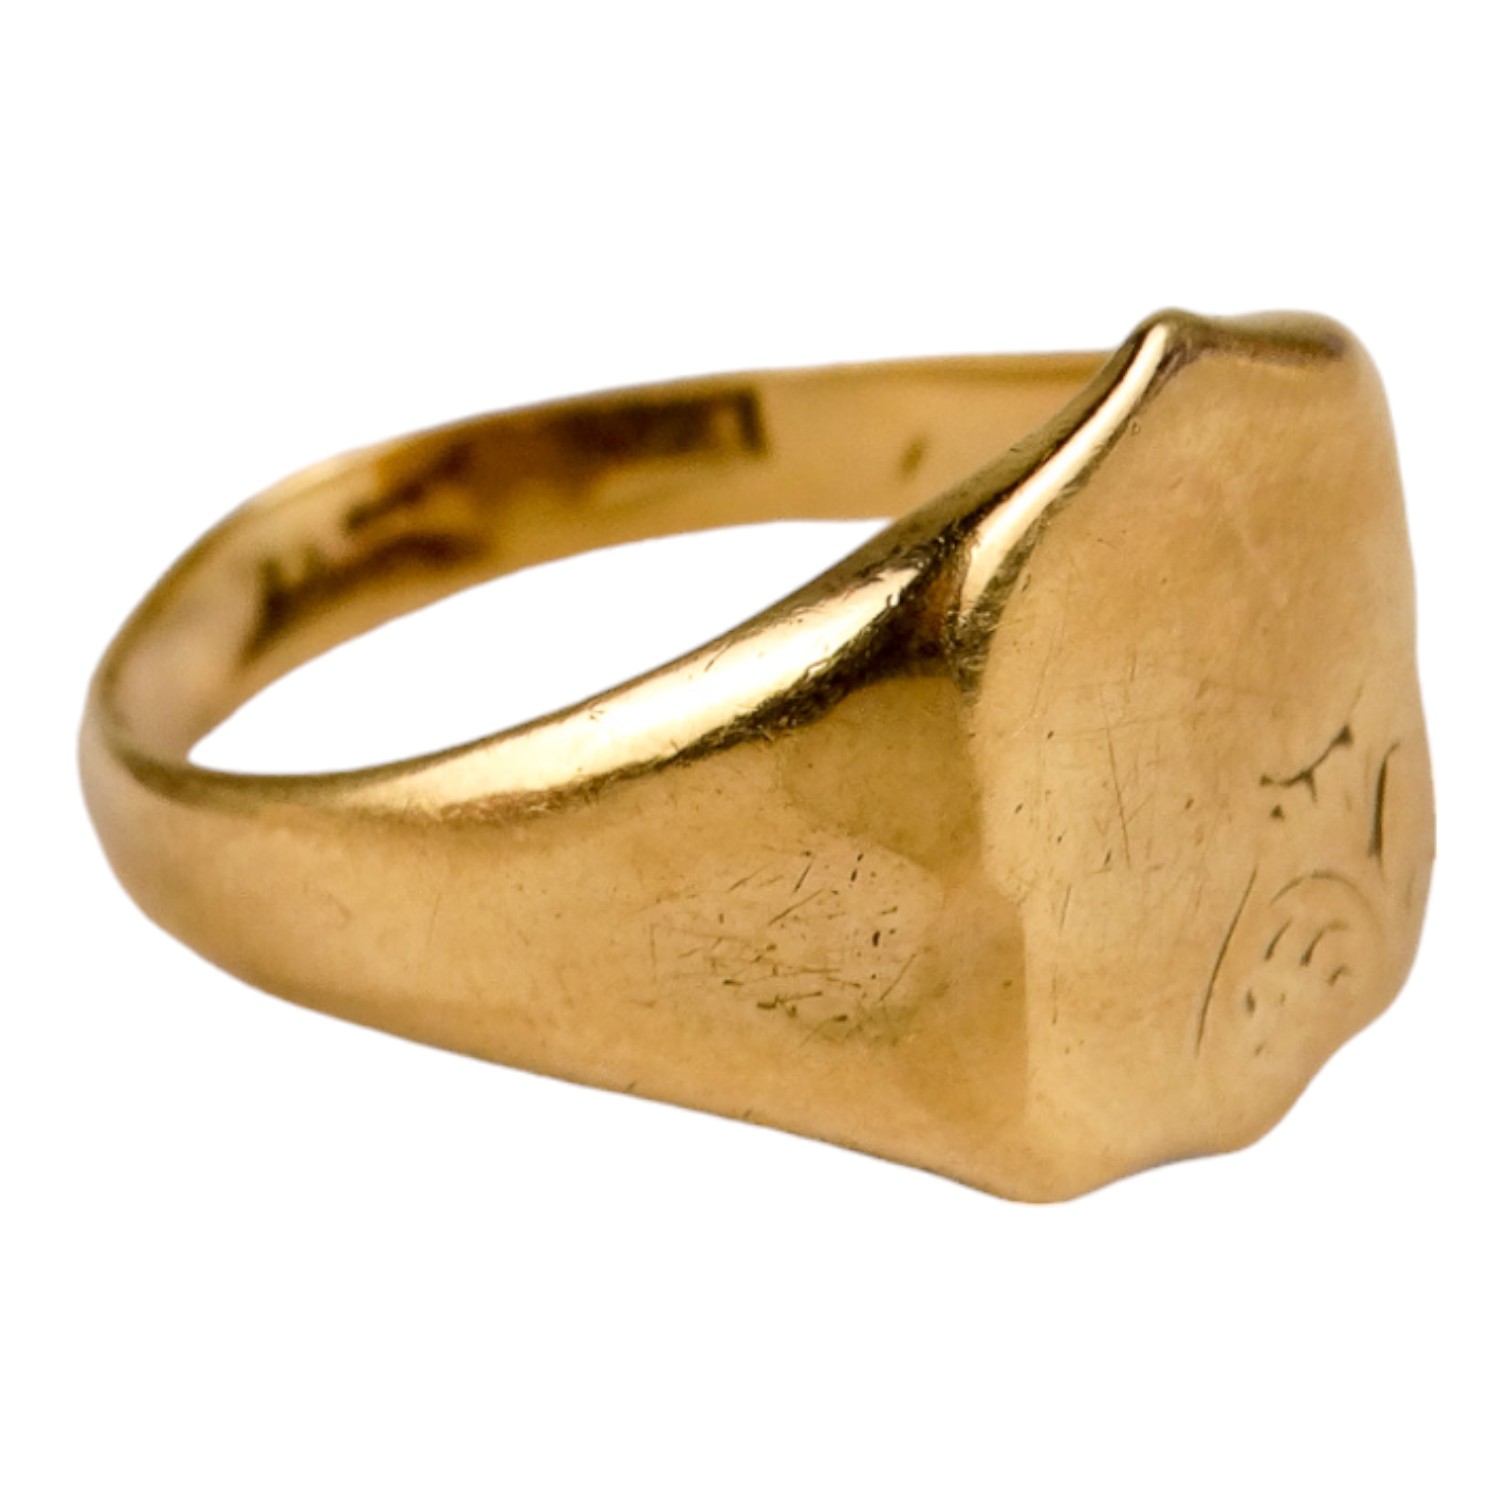 A 9ct yellow gold signet ring - size Q/R, weight 4.1g. - Image 3 of 3